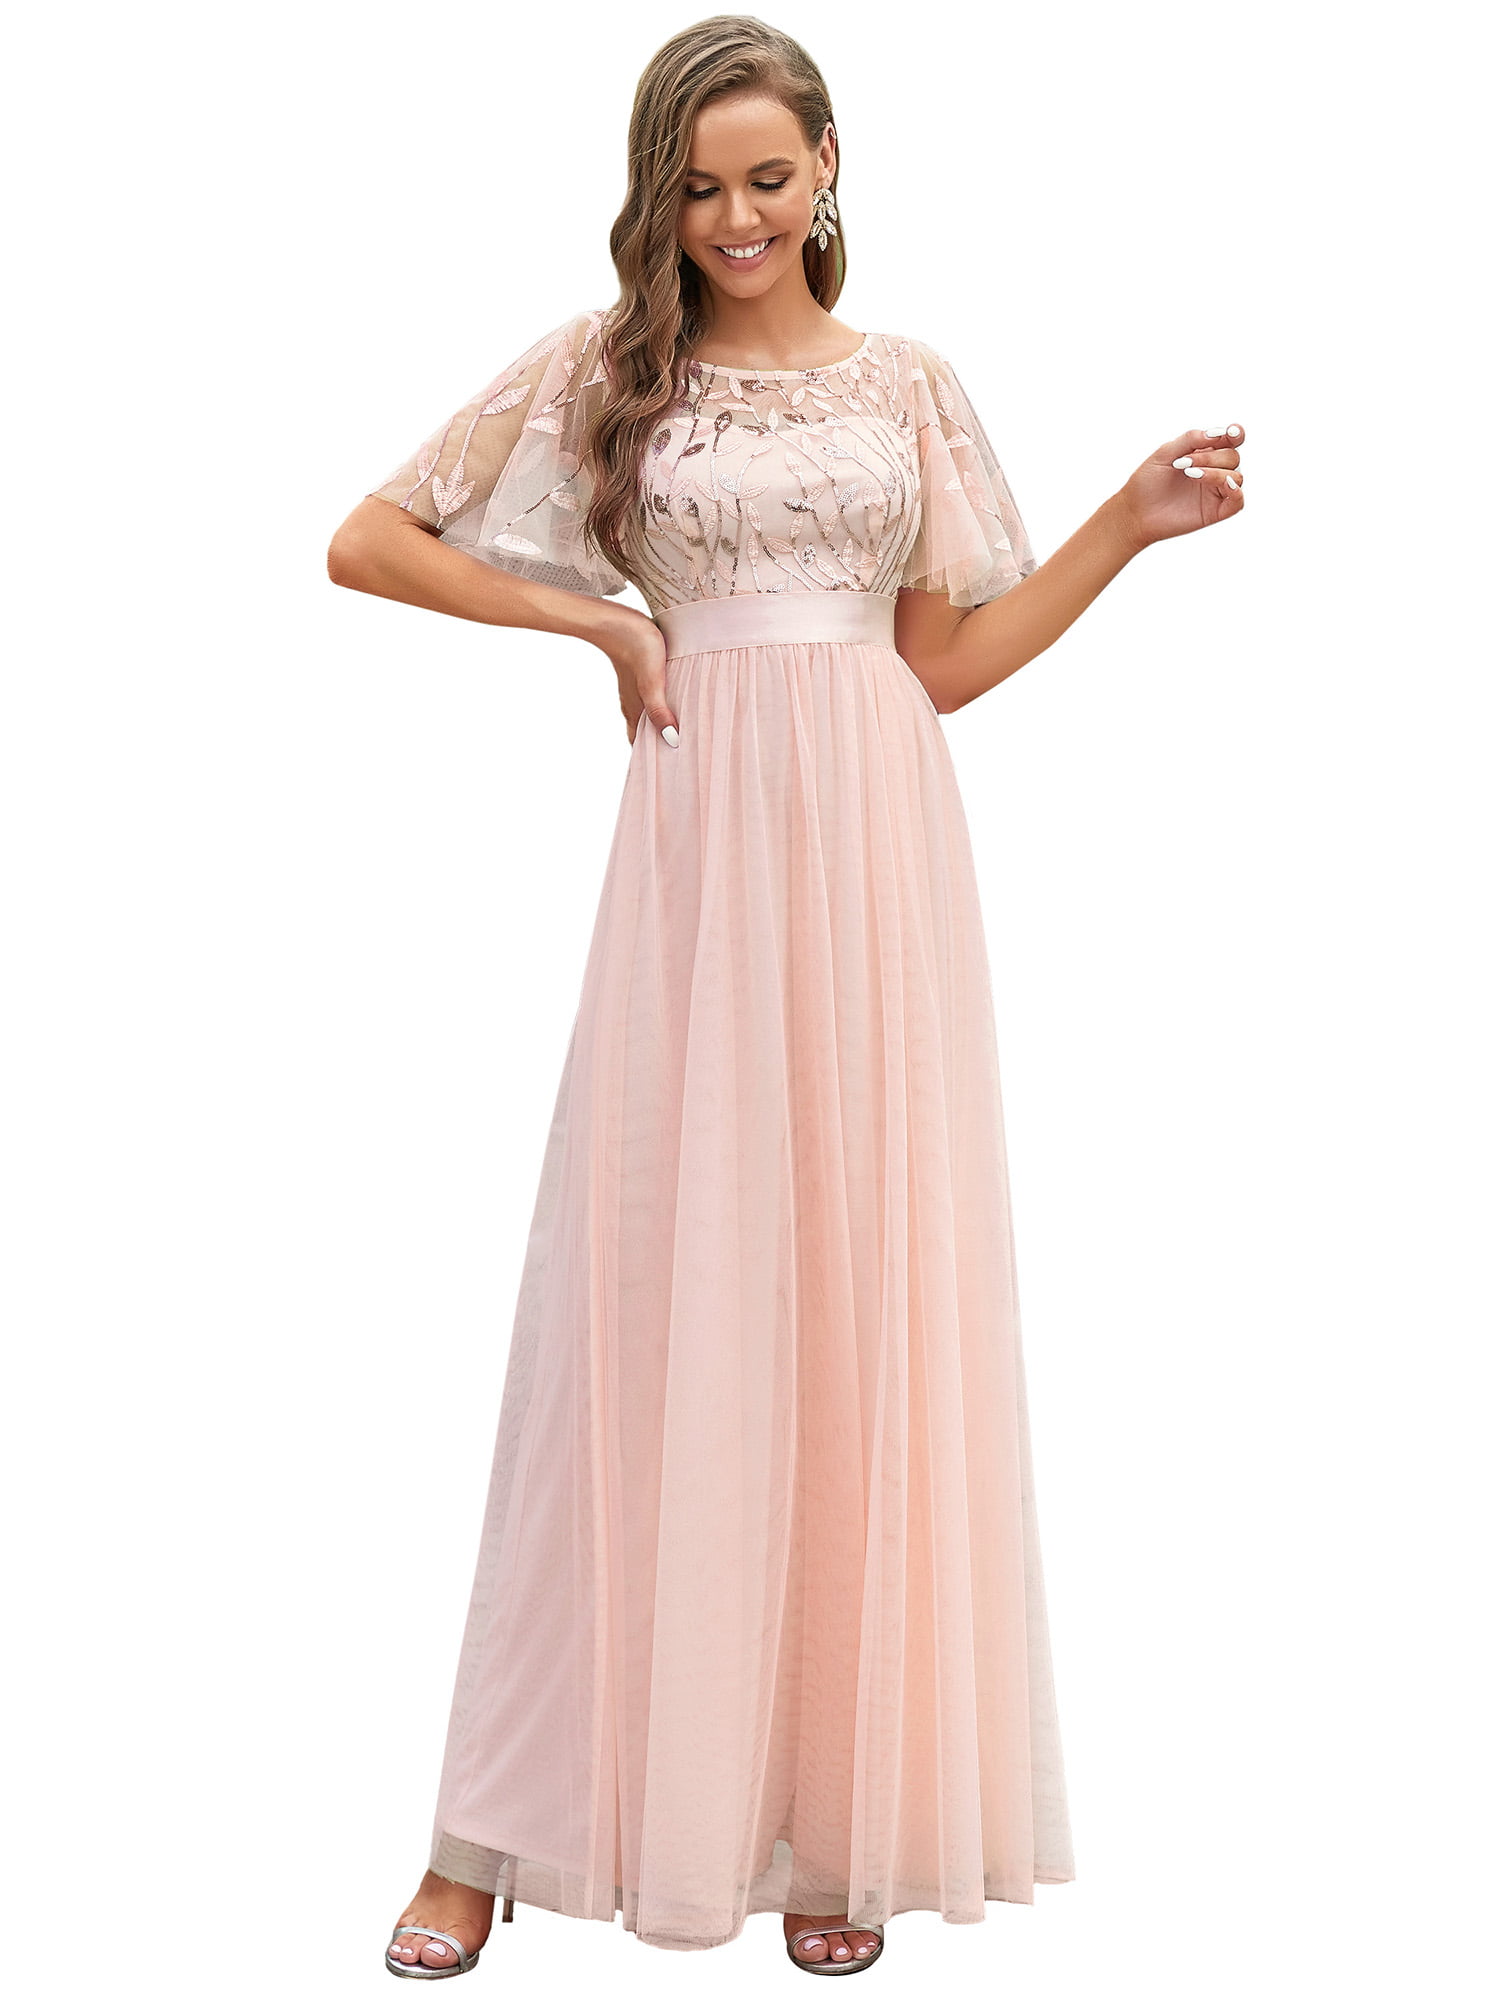 Women Embroidered Long Lace Bridesmaid Dress Evening Prom Gown Formal Wedding